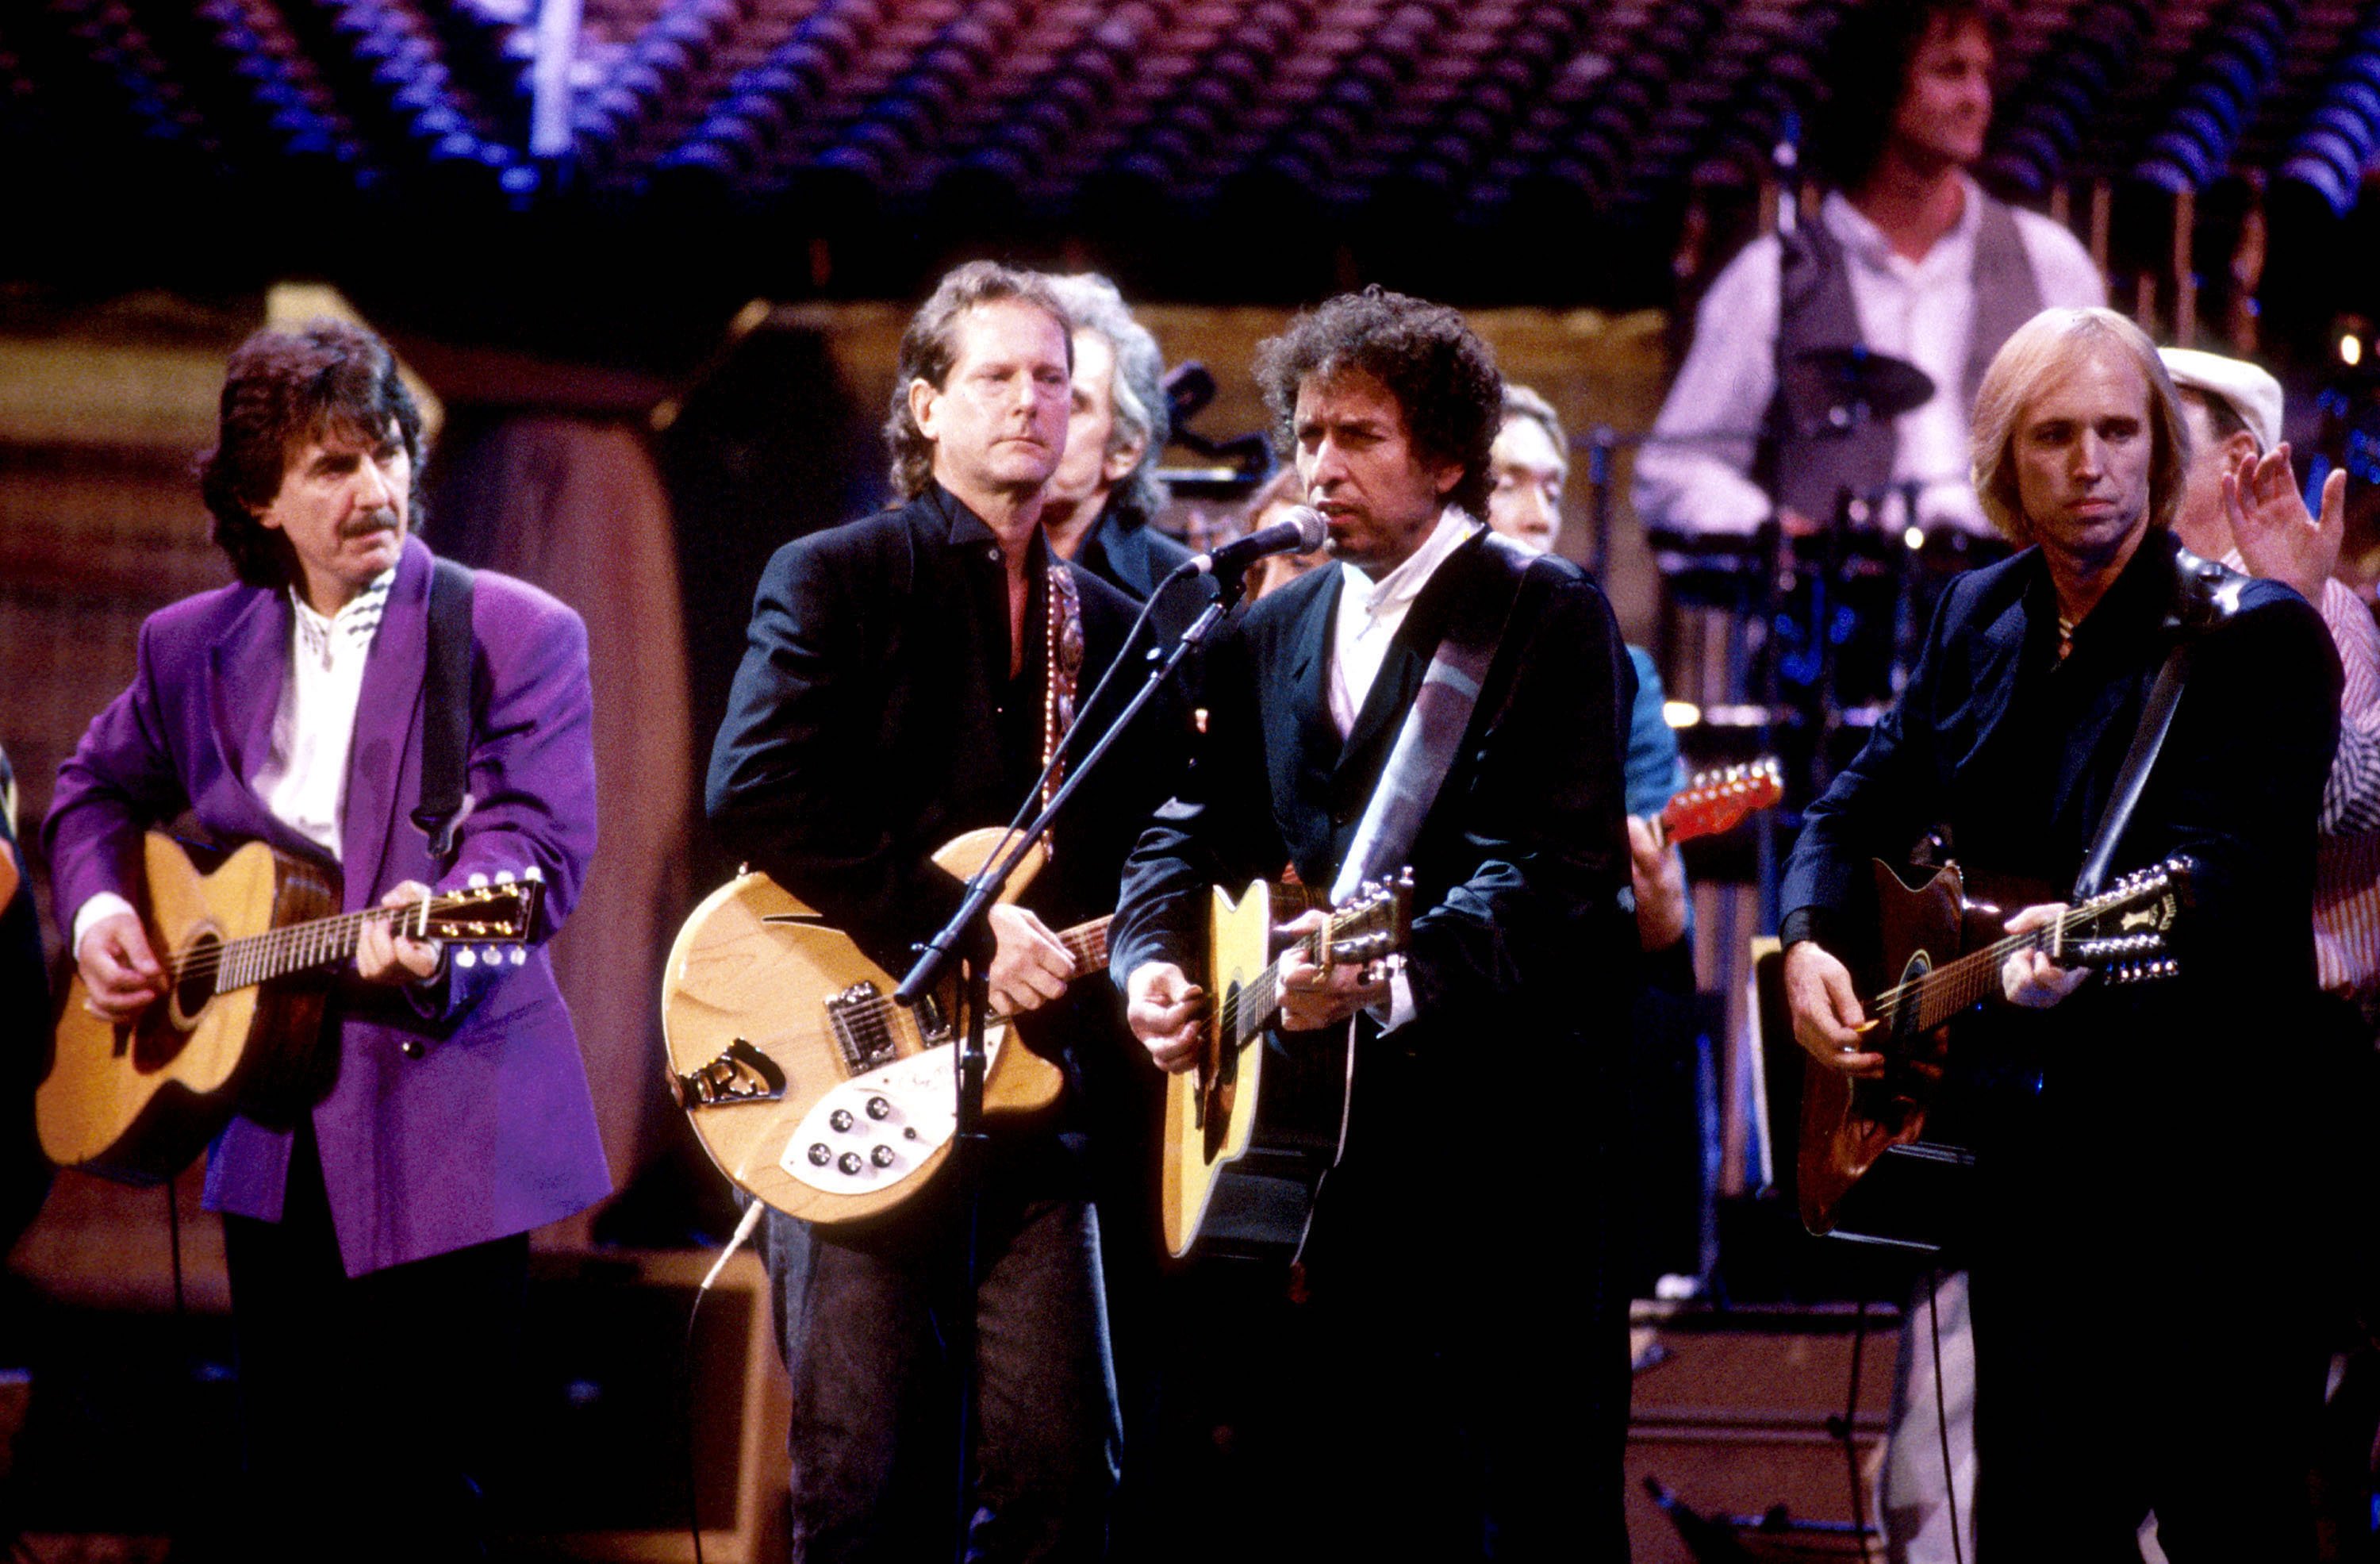 George Harrison, Roger McGuinn, Bob Dylan, and Tom Petty rehearse onstage